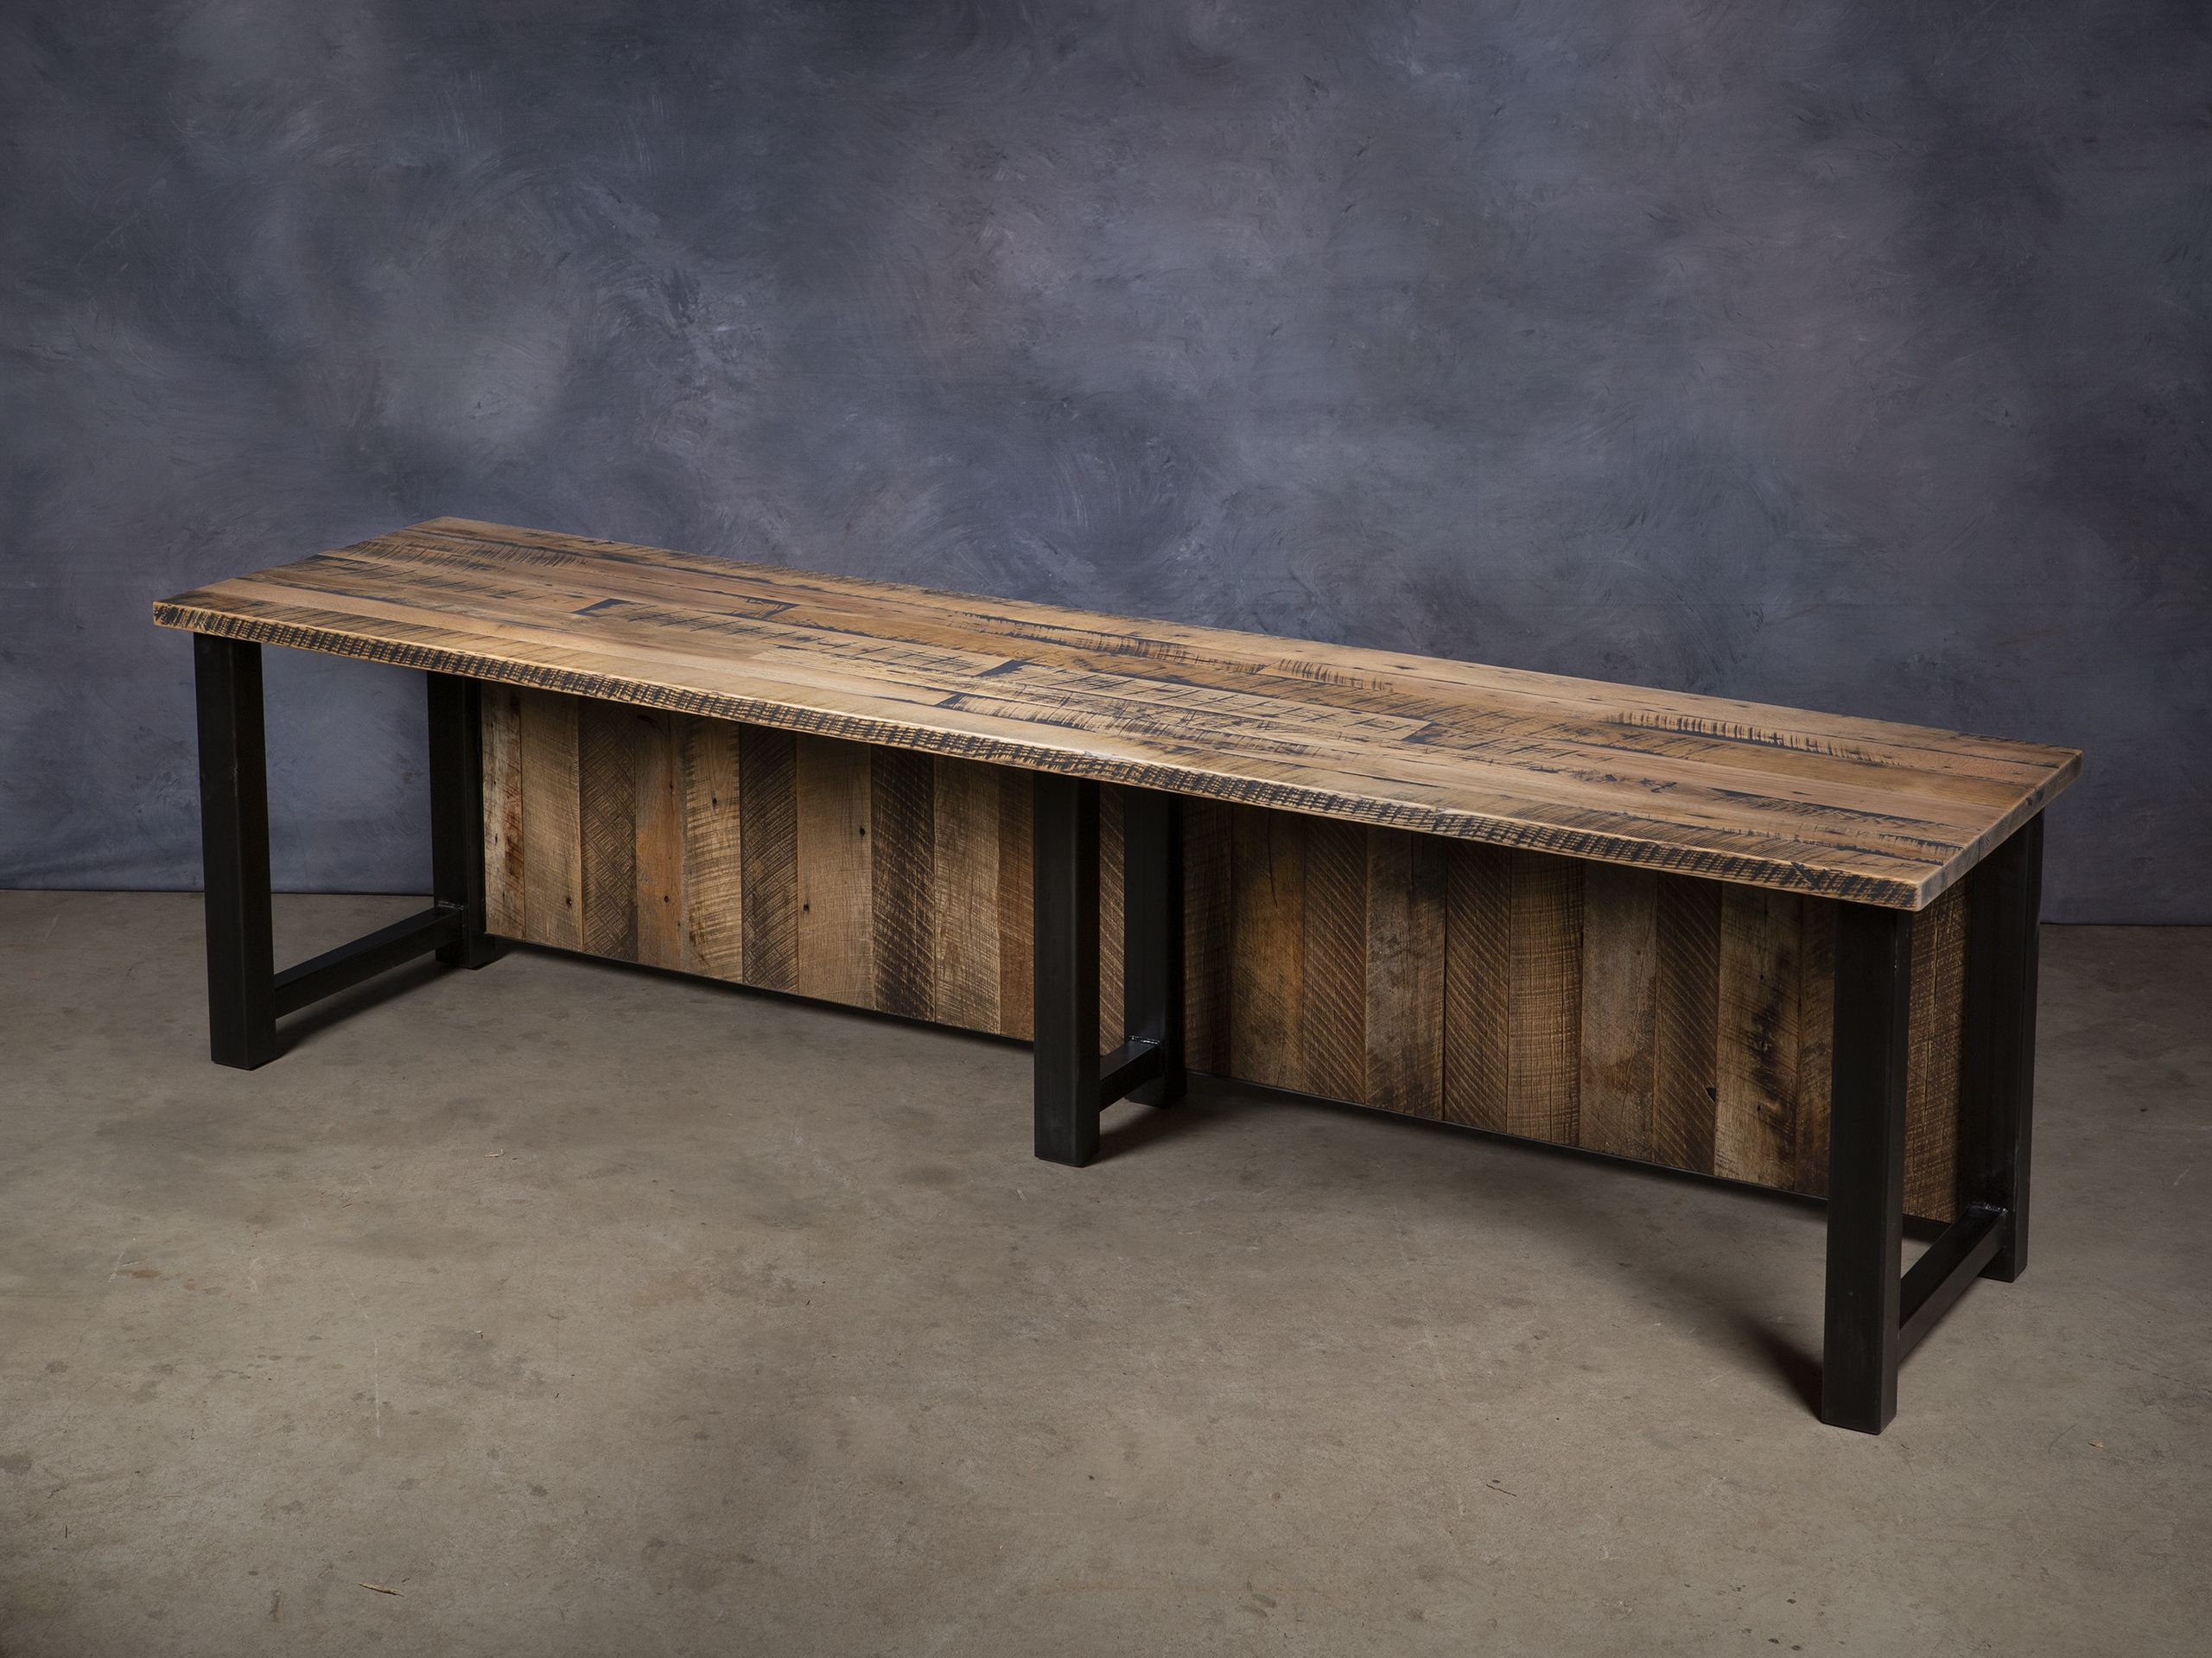 The Nicholson industrial executive desk with reclaimed barnwood top |  Deer Valley Woodworks